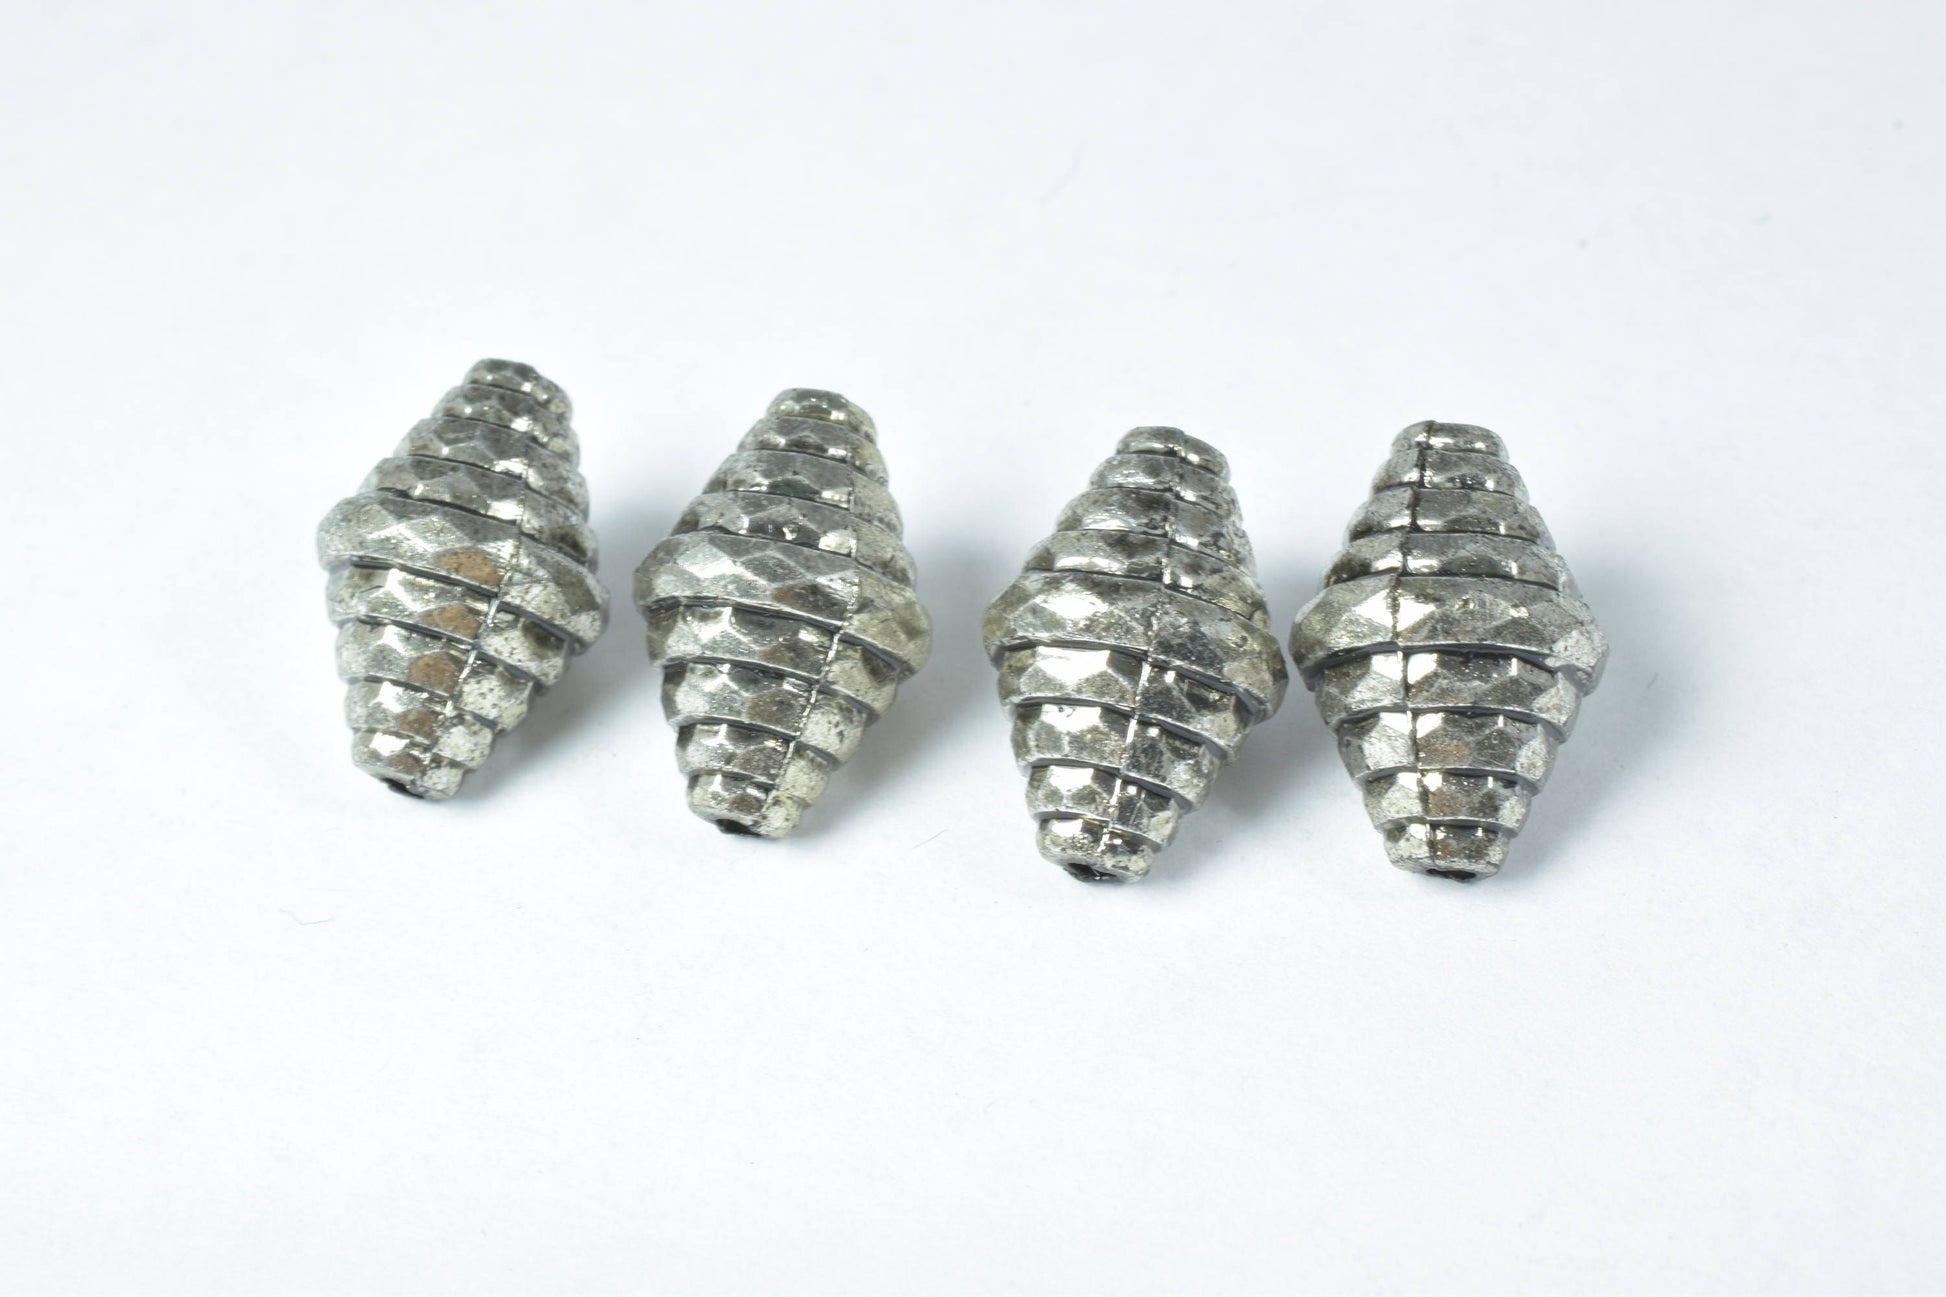 11x17mm Silver Tube Plastic Textured Beads/Plastic Silver Cone Beads/2mm hole size/Sold by 200pcs/Wholesale Beads/Beads/Silver Cyclone Beads